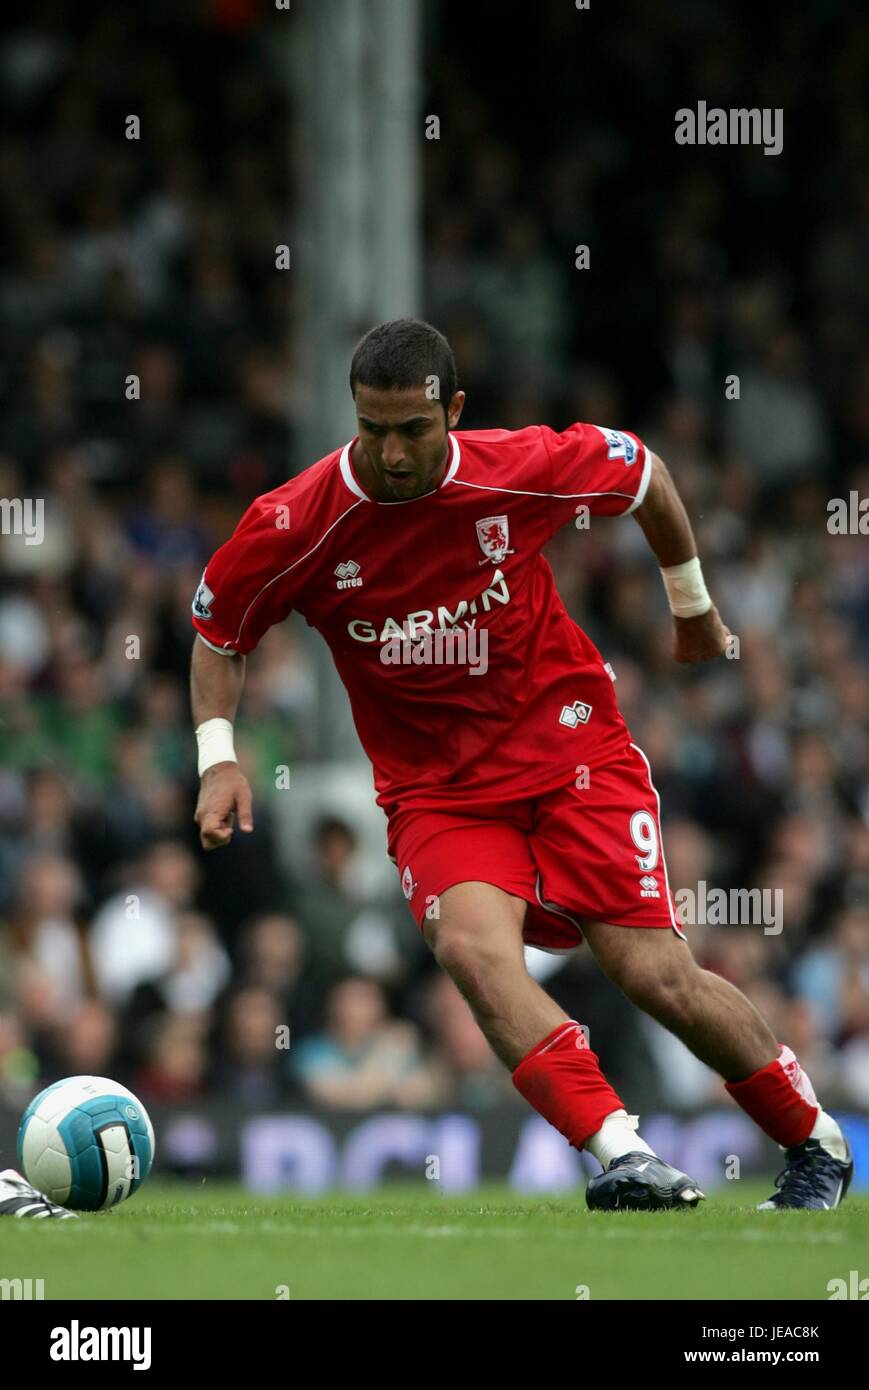 MIDO MIDDLESBROUGH FC CRAVEN COTTAGE LONDON GREAT BRITAIN 18 August 2007 Stock Photo